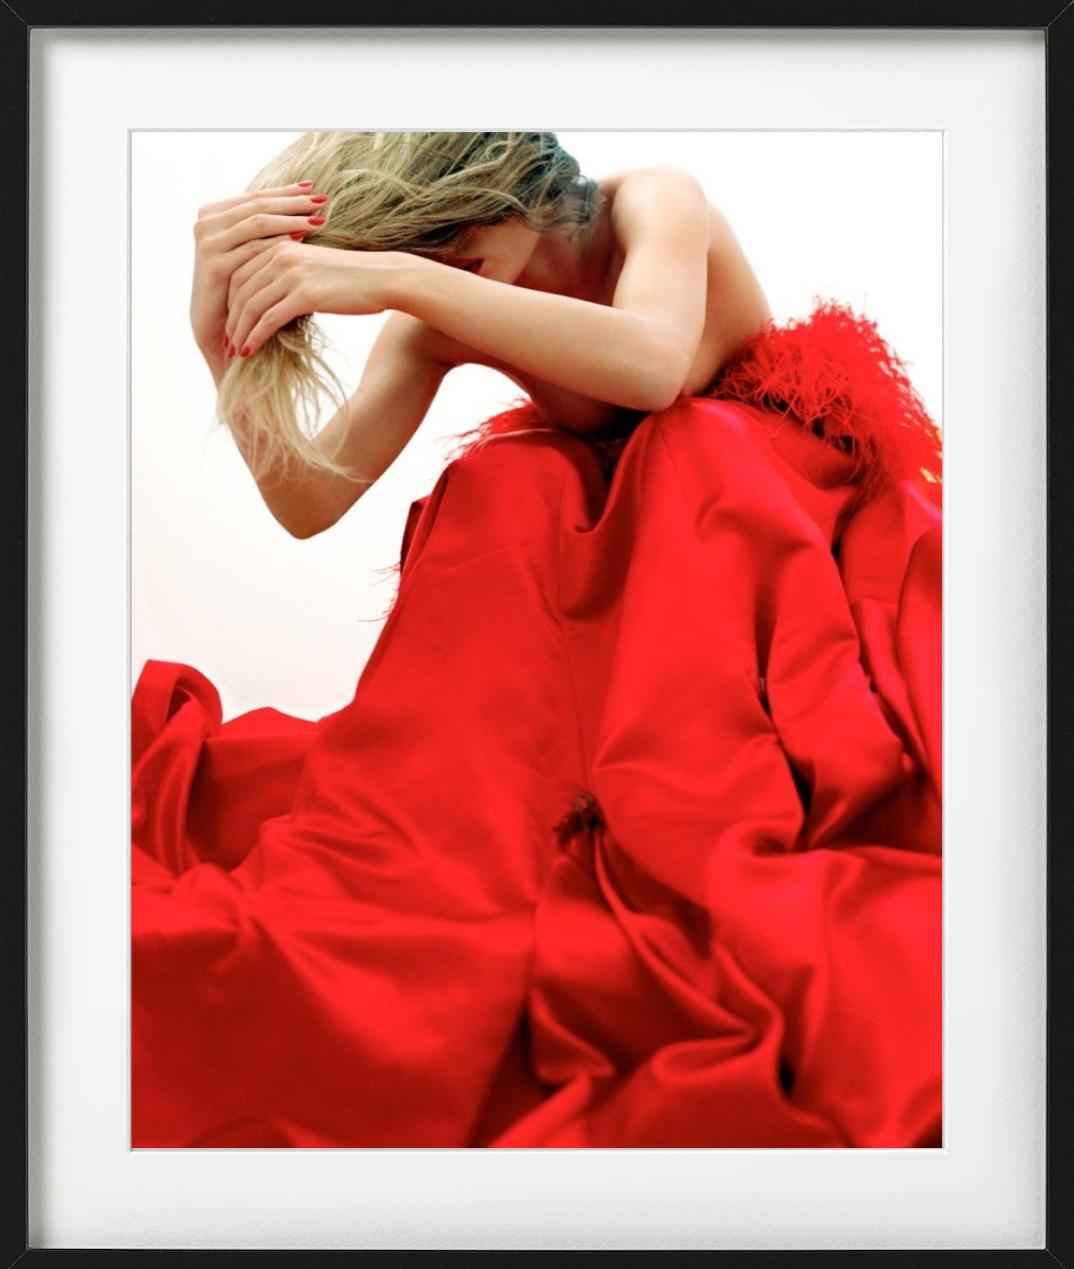 Stand Outside Yourself - woman in red dress bending over, fine art photography - Red Color Photograph by Guido Argentini